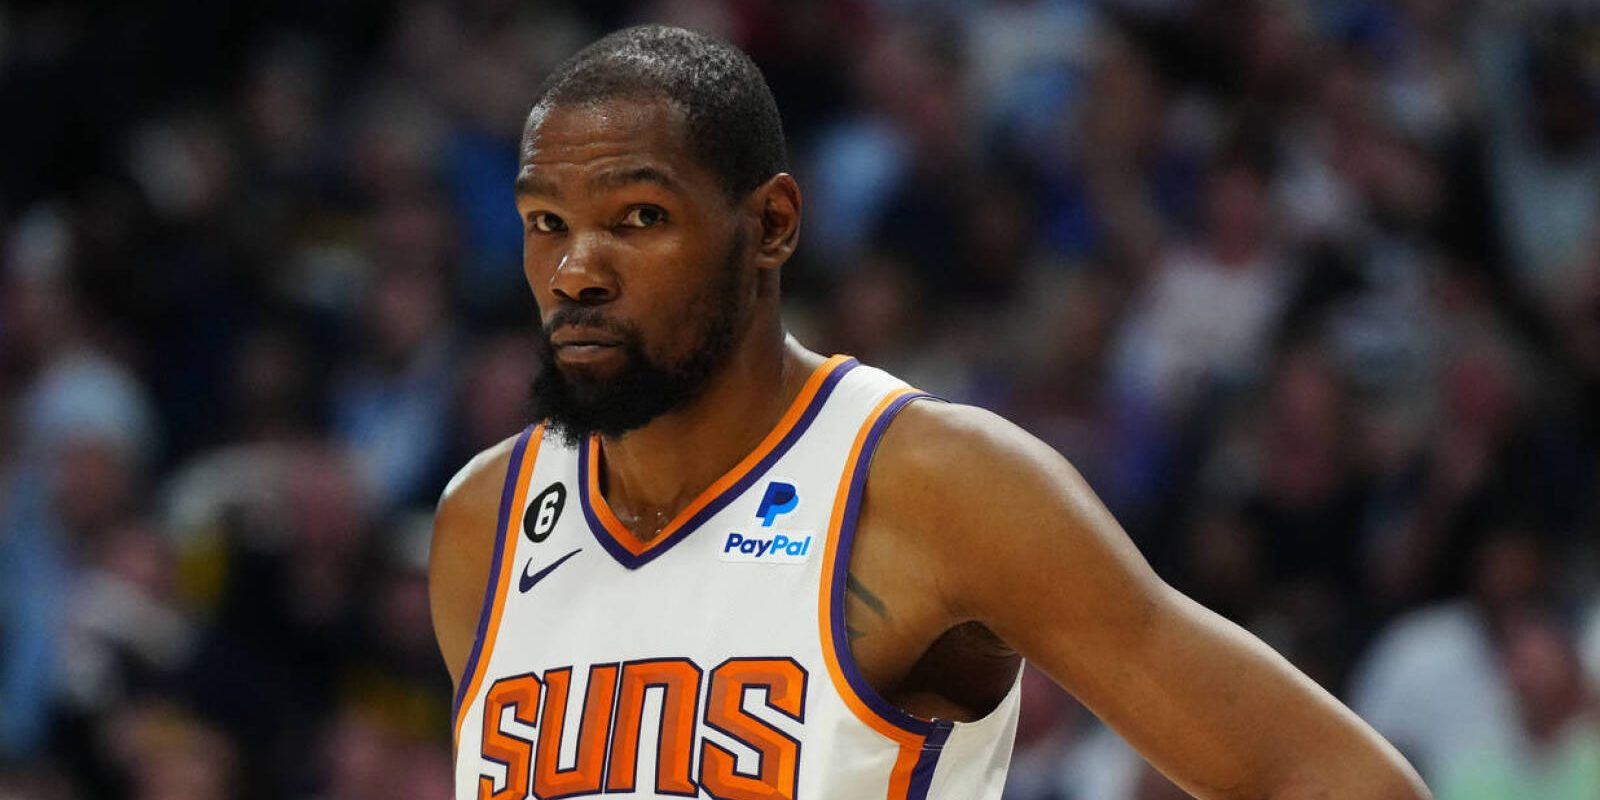 May 1, 2023; Denver, Colorado, USA; Phoenix Suns forward Kevin Durant (35) reacts in the second half against the Denver Nuggets during game two of the 2023 NBA playoffs at Ball Arena. Mandatory Credit: Ron Chenoy-USA TODAY Sports